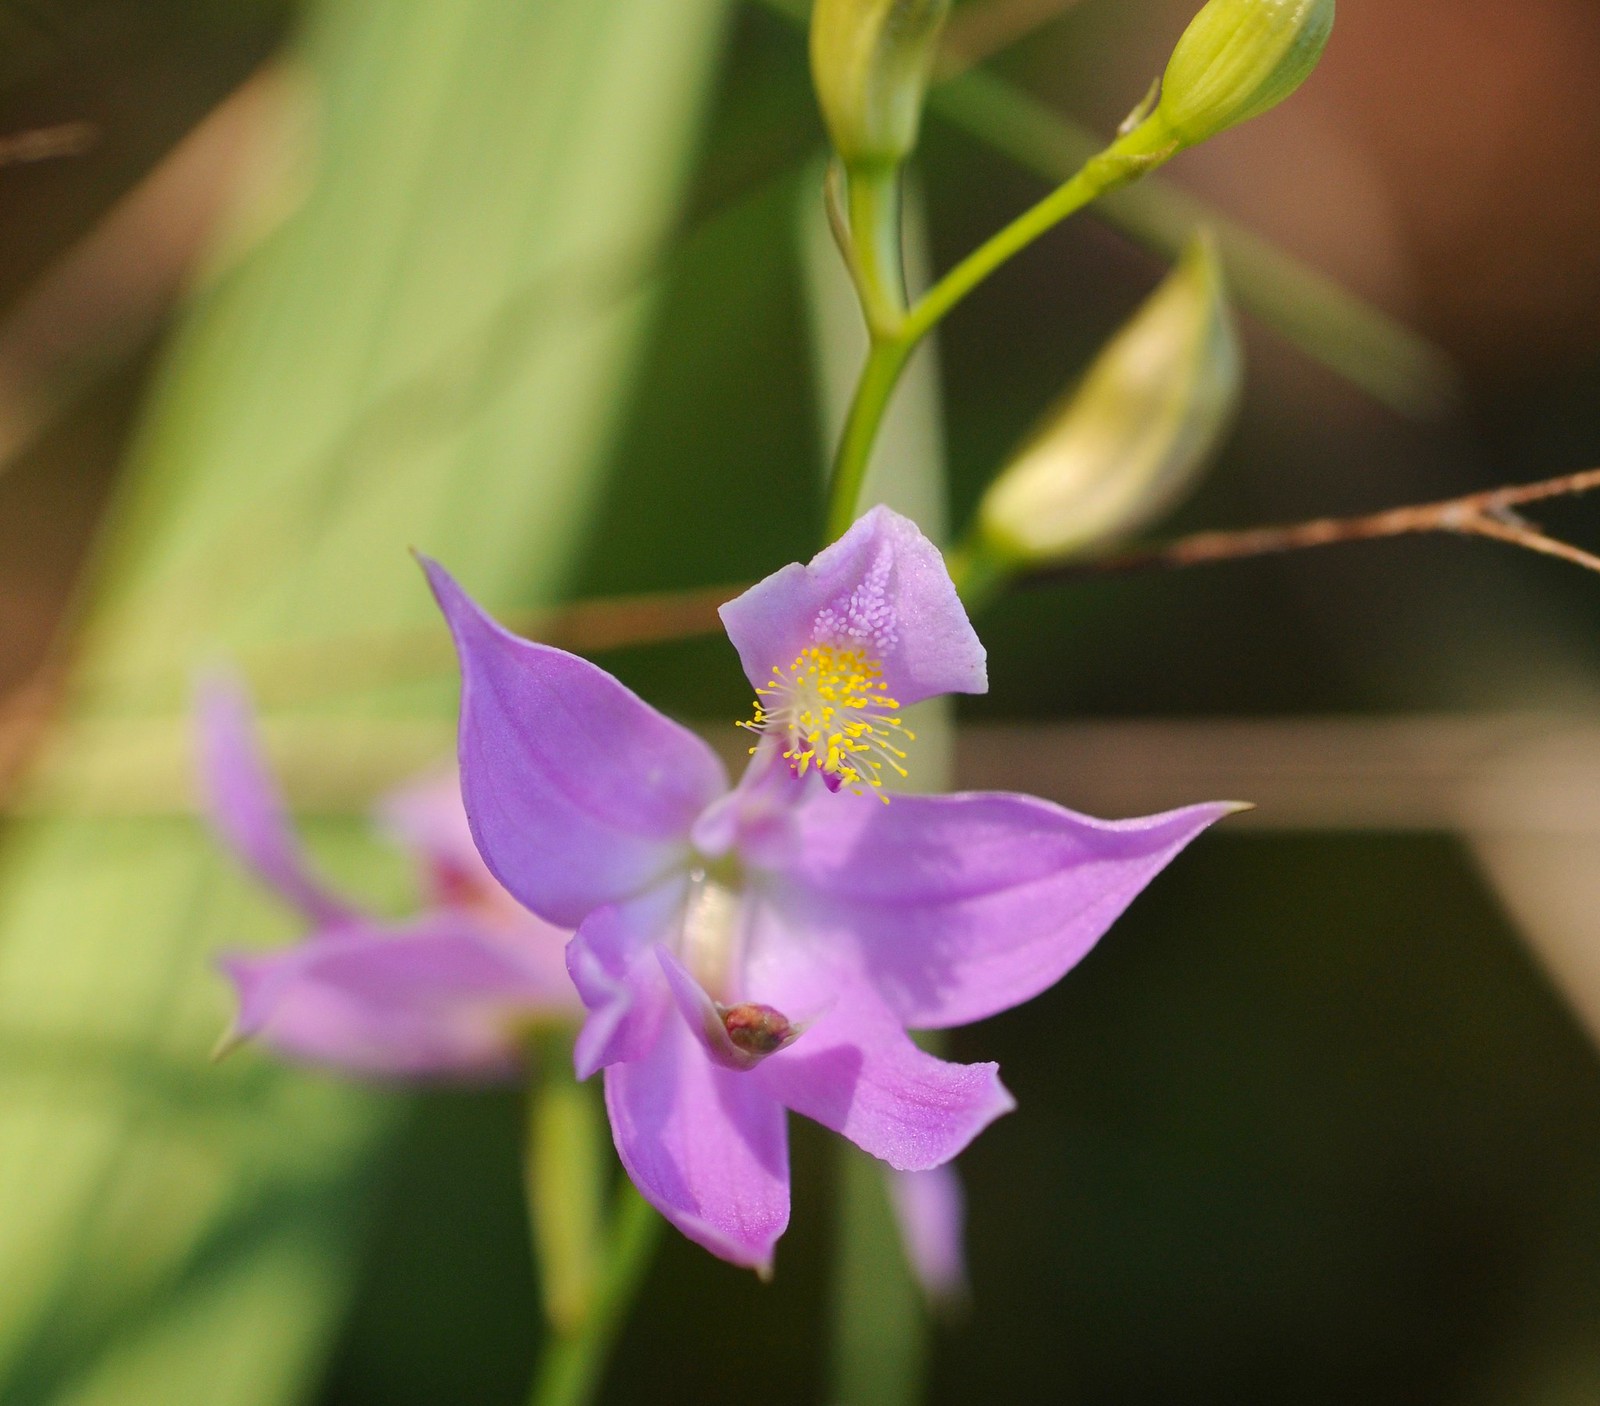 "Calopogon oklahomensis" by sonnia hill is licensed with CC BY 2.0. To view a copy of this license, visit https://creativecommons.org/licenses/by/2.0/